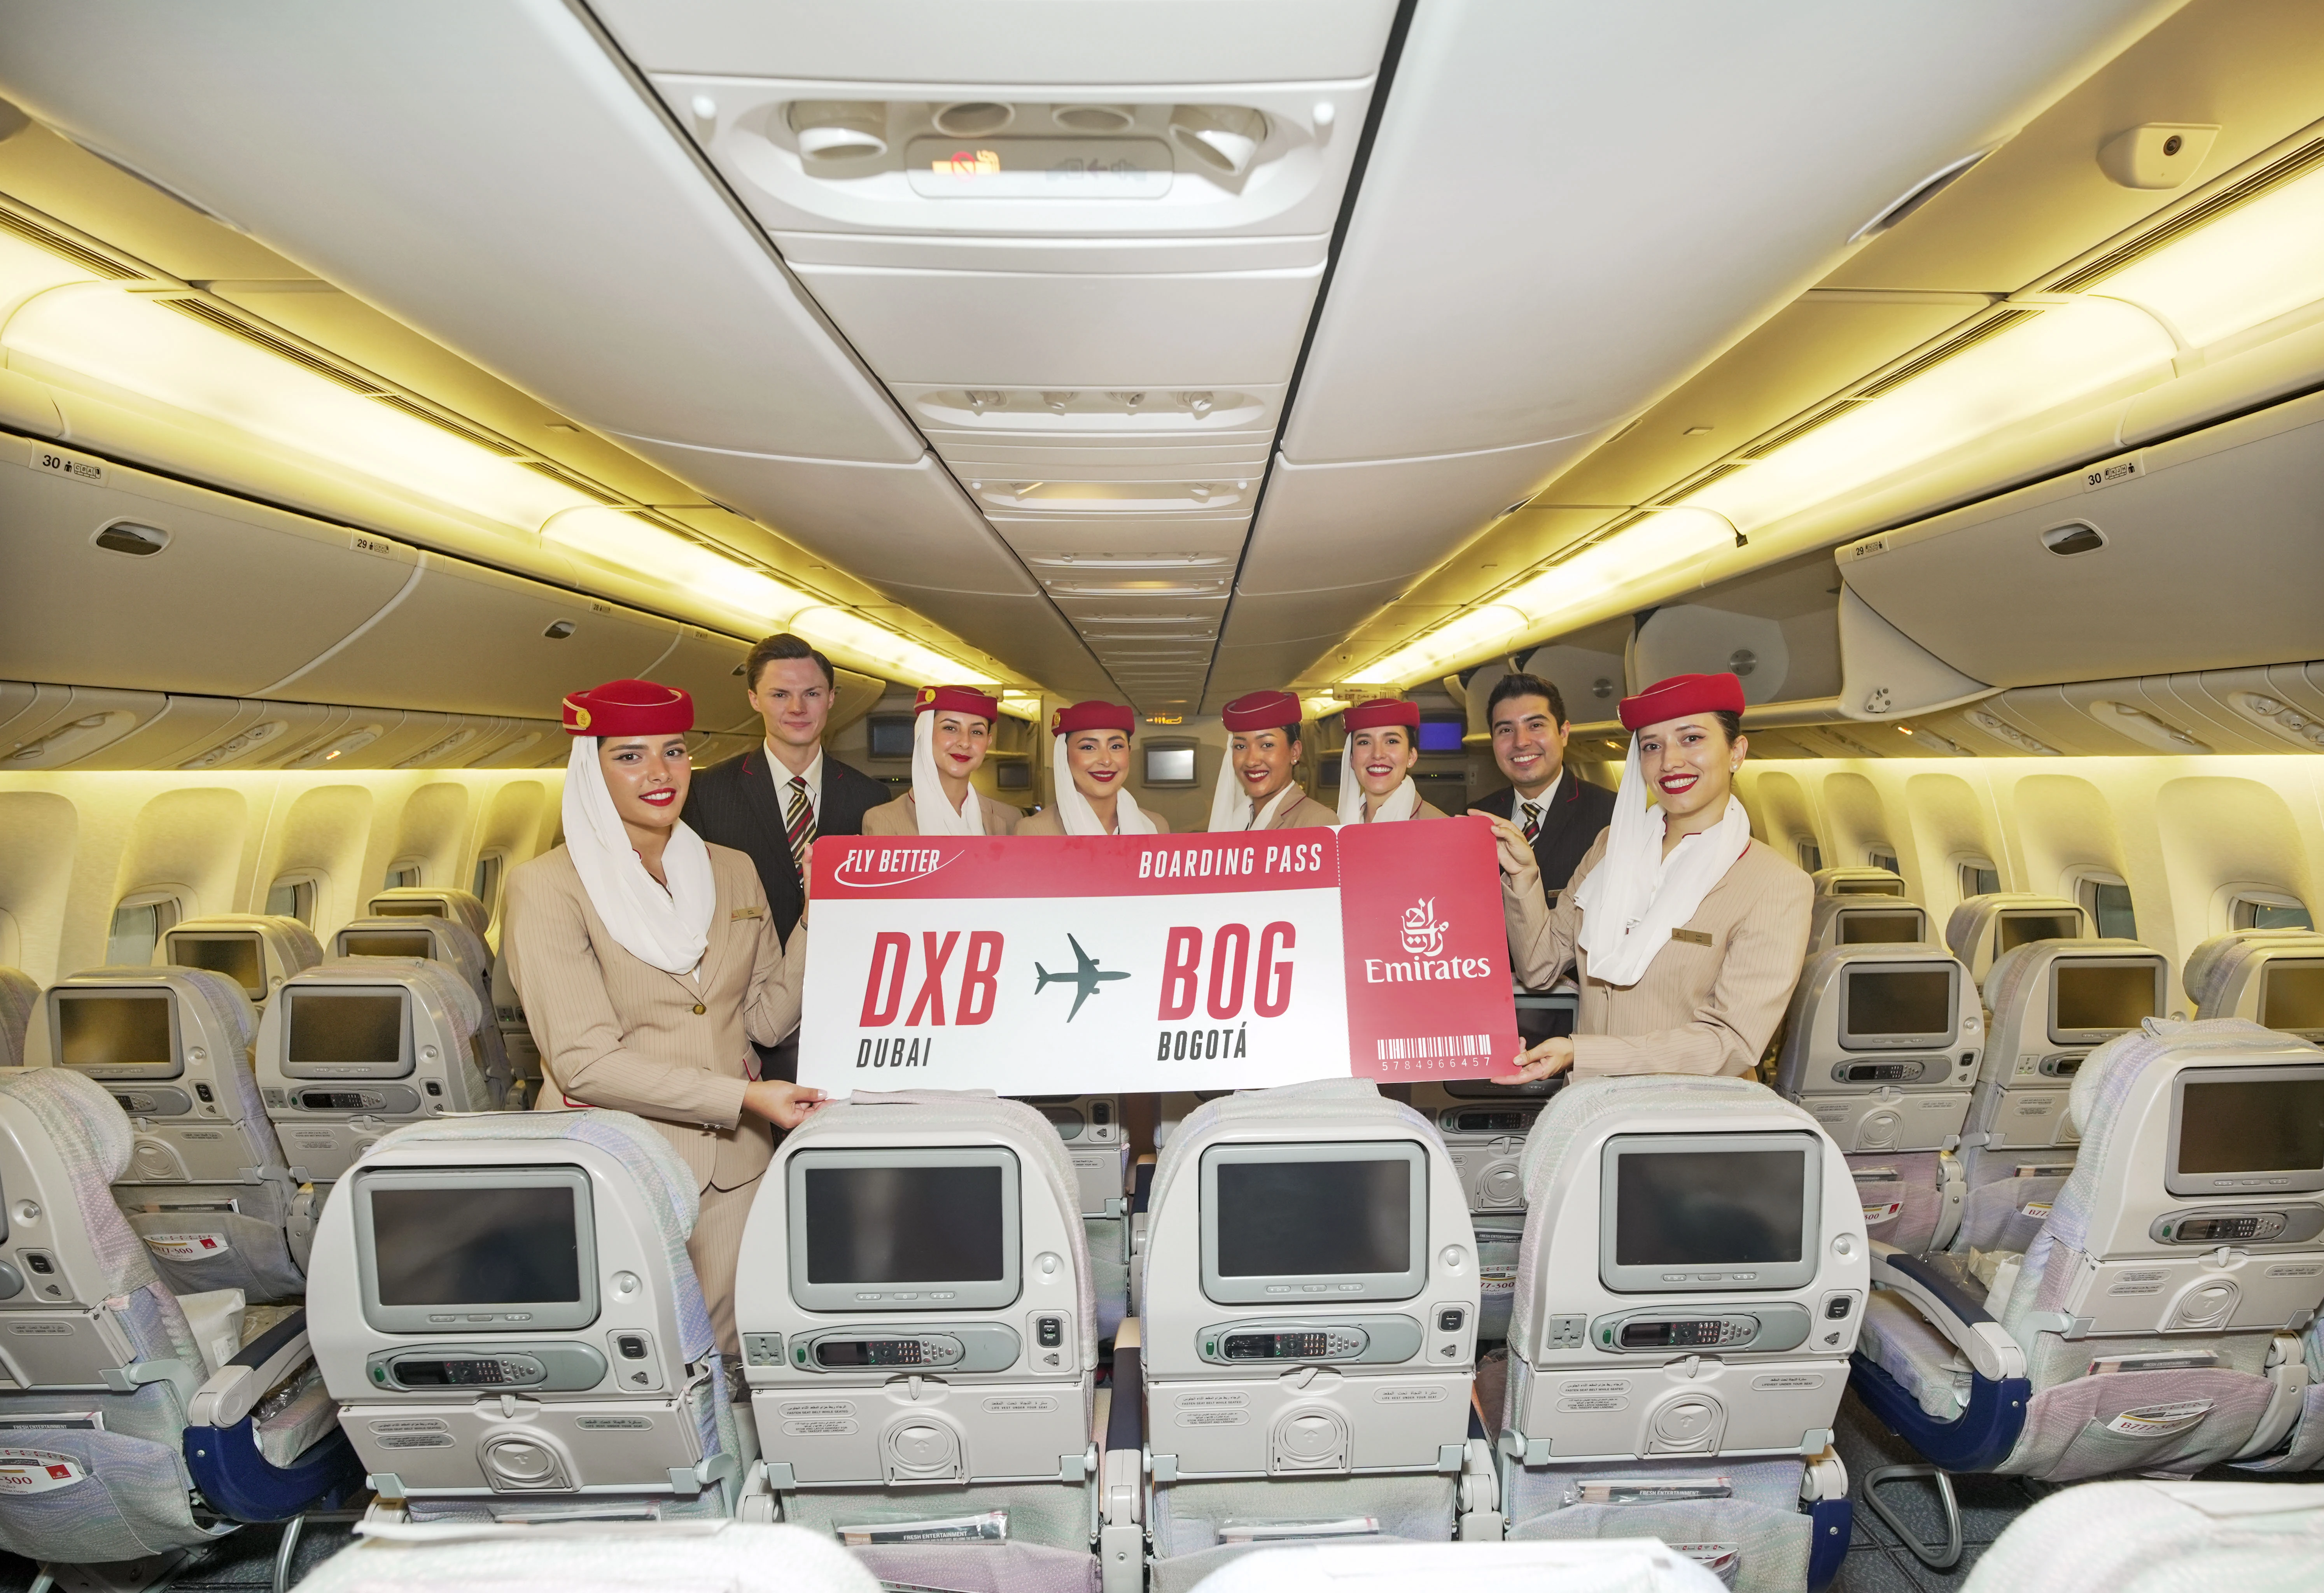 Emirates Airlines (EK) has commenced its eagerly awaited services to Bogota (BOG), the capital of Colombia, expanding its South American network to four destinations and reaching a total of 19 points across the Americas.